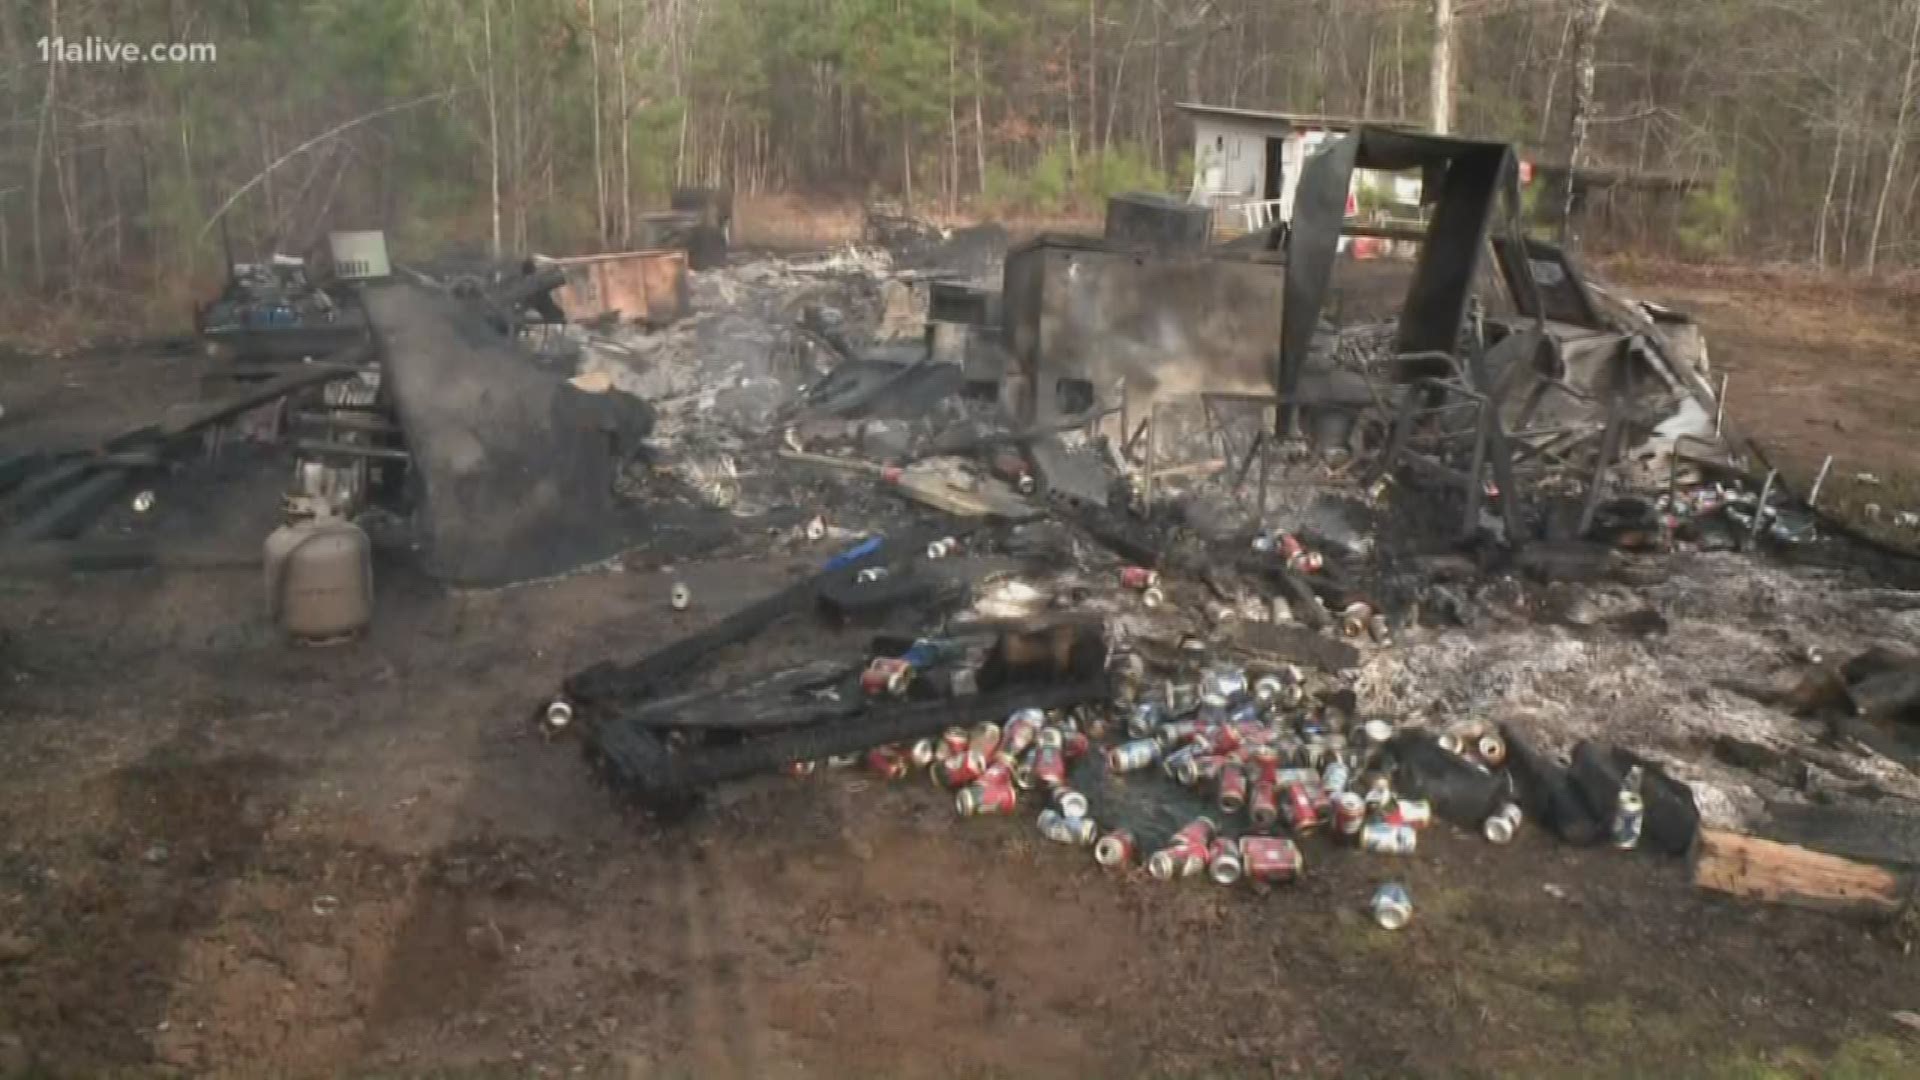 A house fire killed one man in Coweta County, officials said. The fire chief said the driveway's terrain made it difficult for equipment to get to the house.